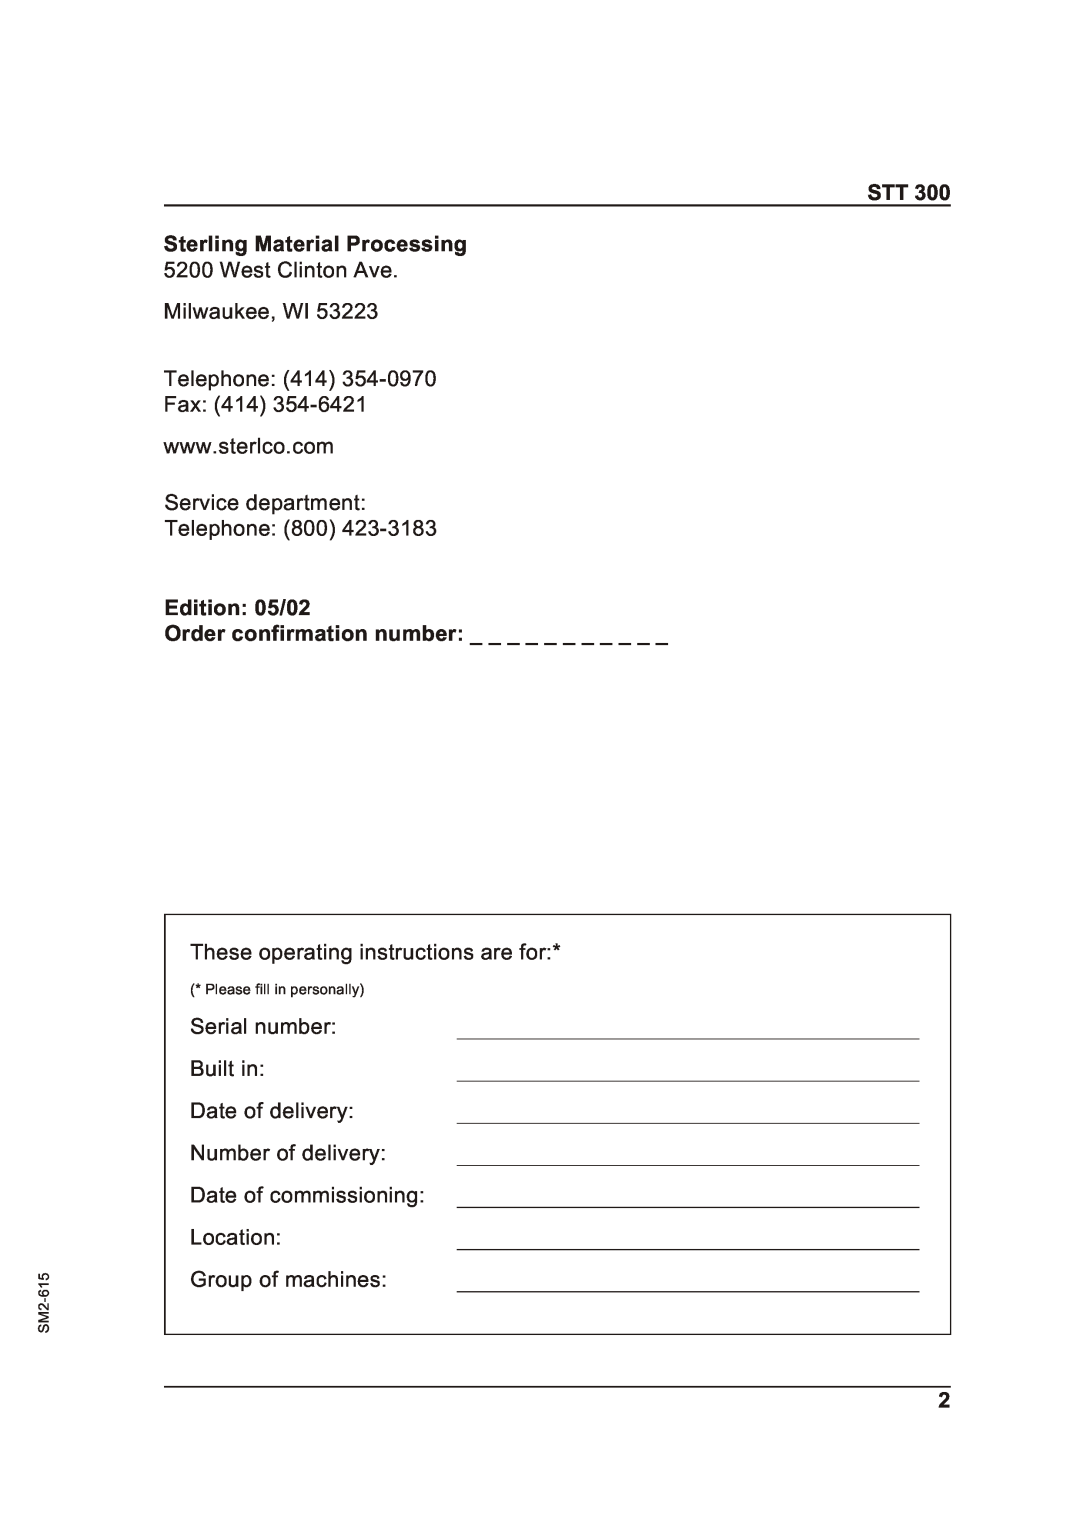 Sterling STT 300 operating instructions STT Sterling Material Processing, Edition 05/02, Order confirmation number, SM2-615 